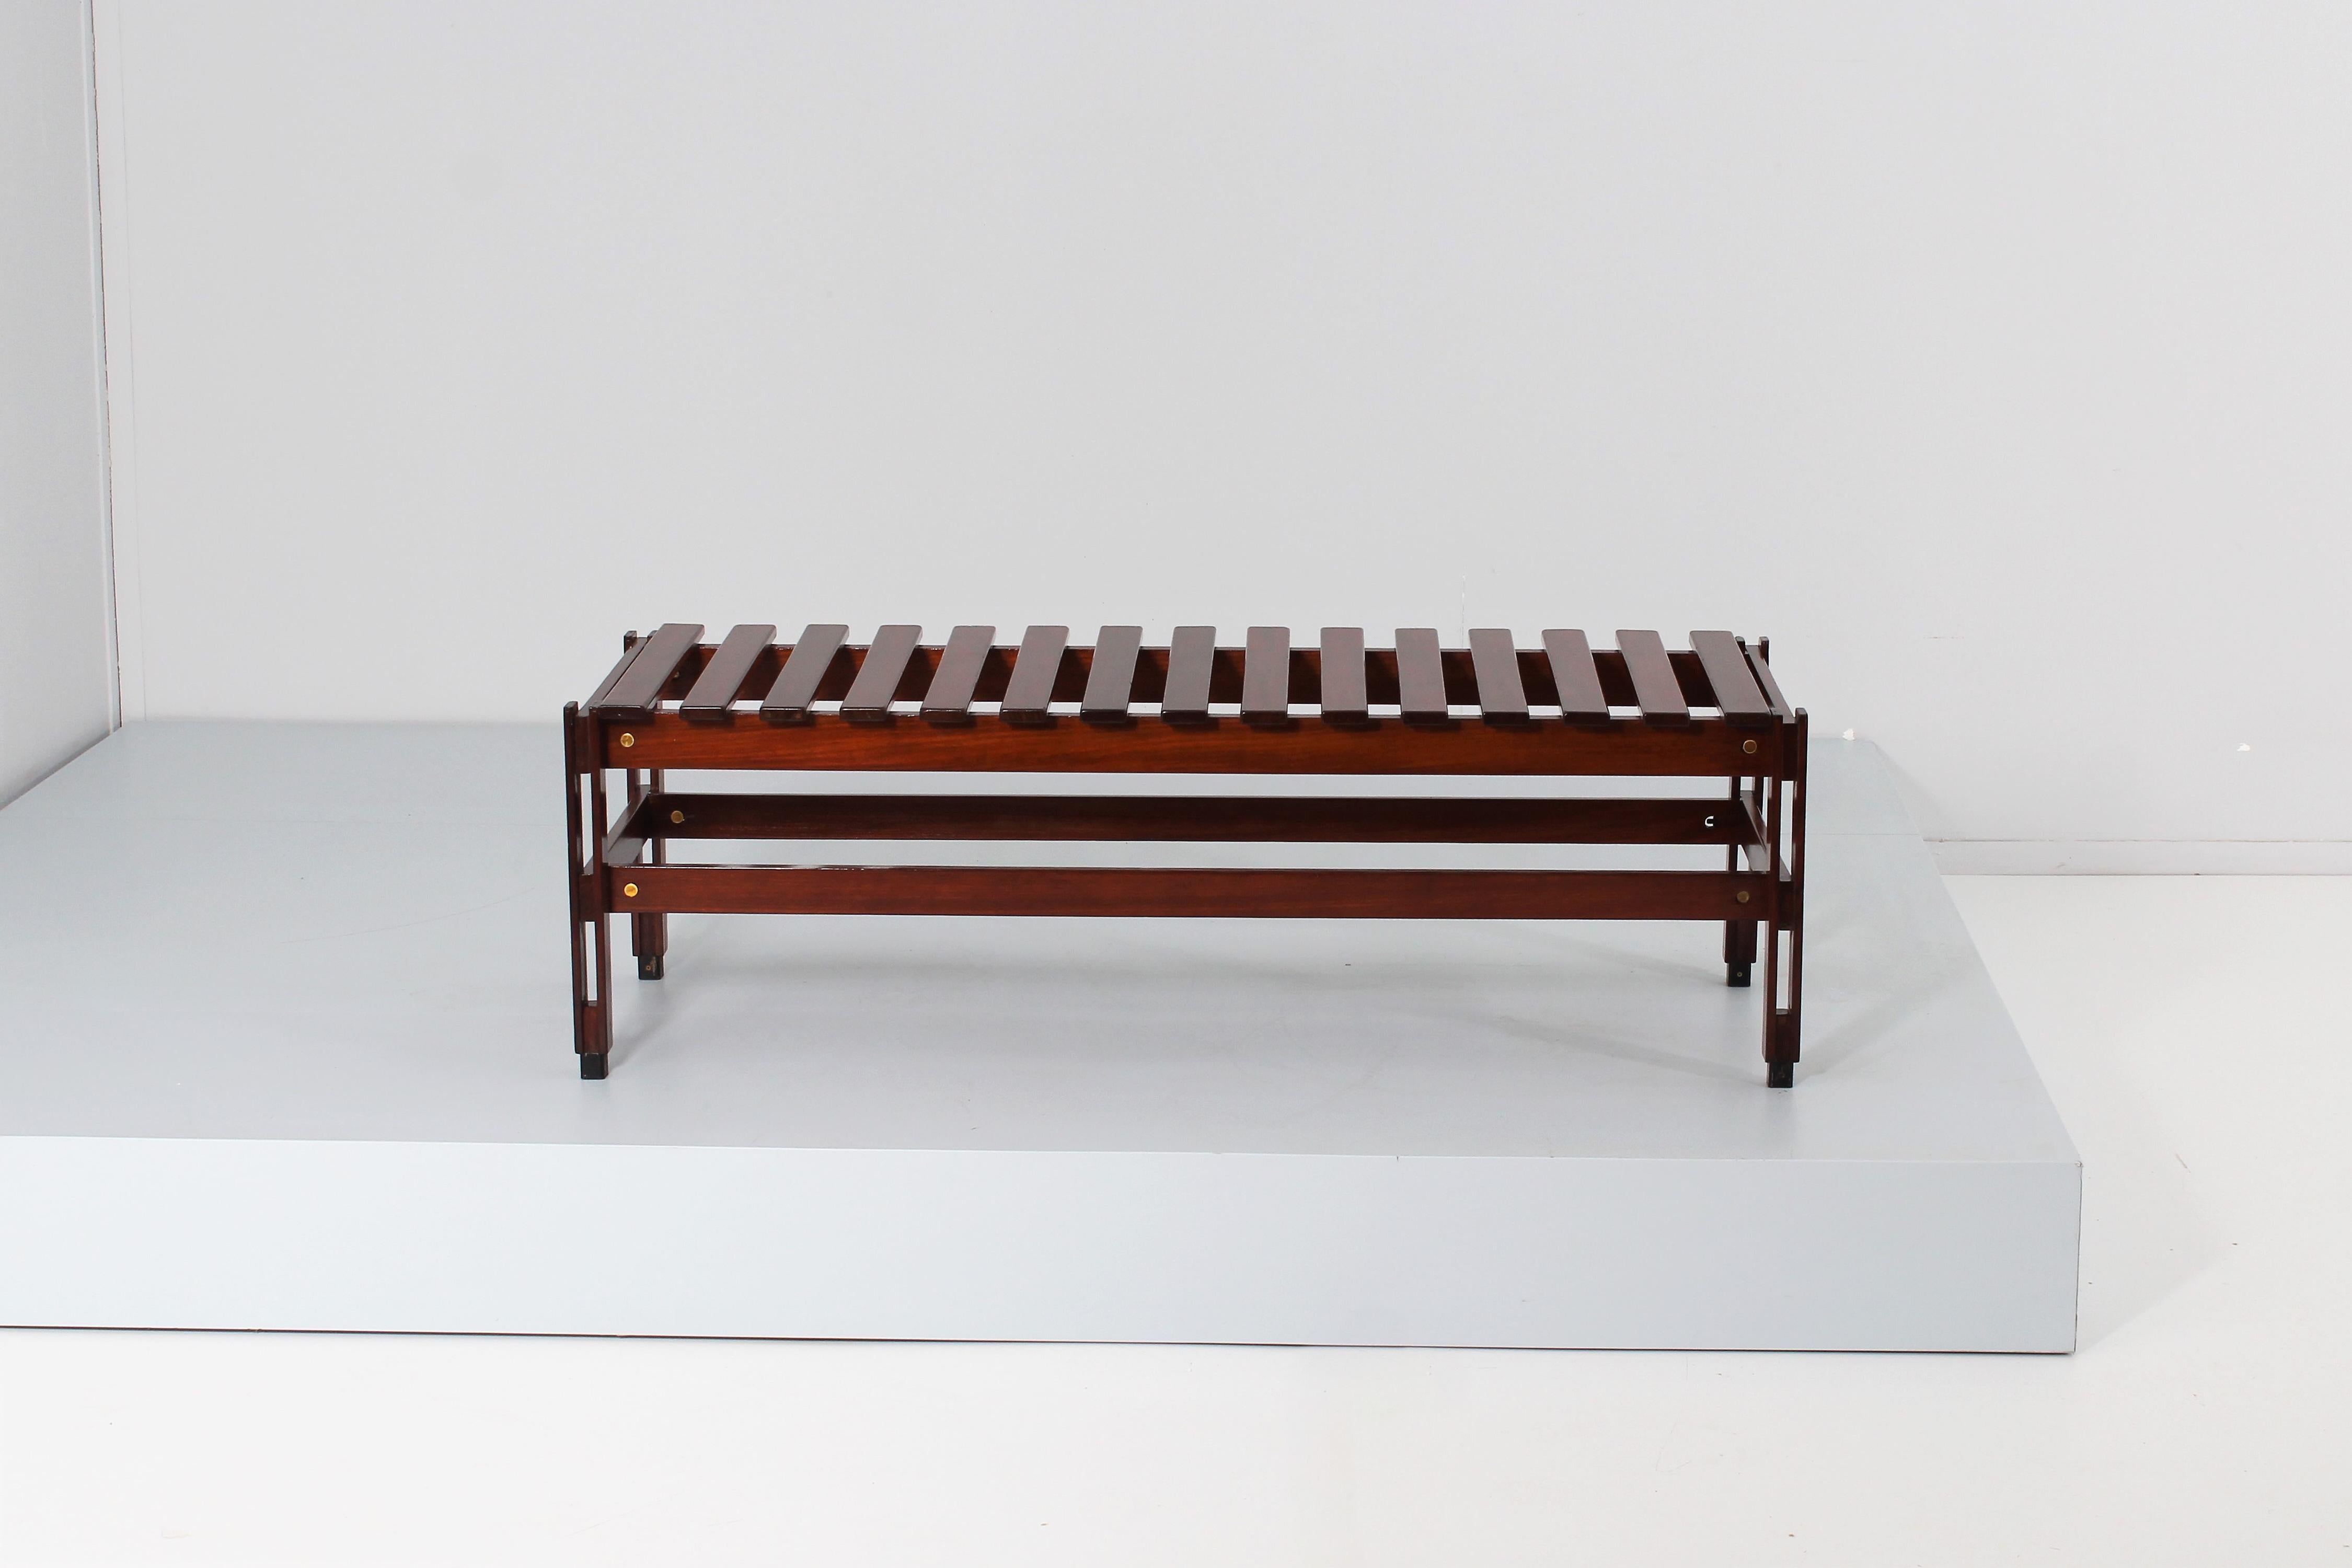 Very rare bench attibuted to Ico Parisi in 1950s.
The low seat is made of teak with burnished brass details
Restored, sanded and oil finished.
Wear consistent with age and use.
 
 